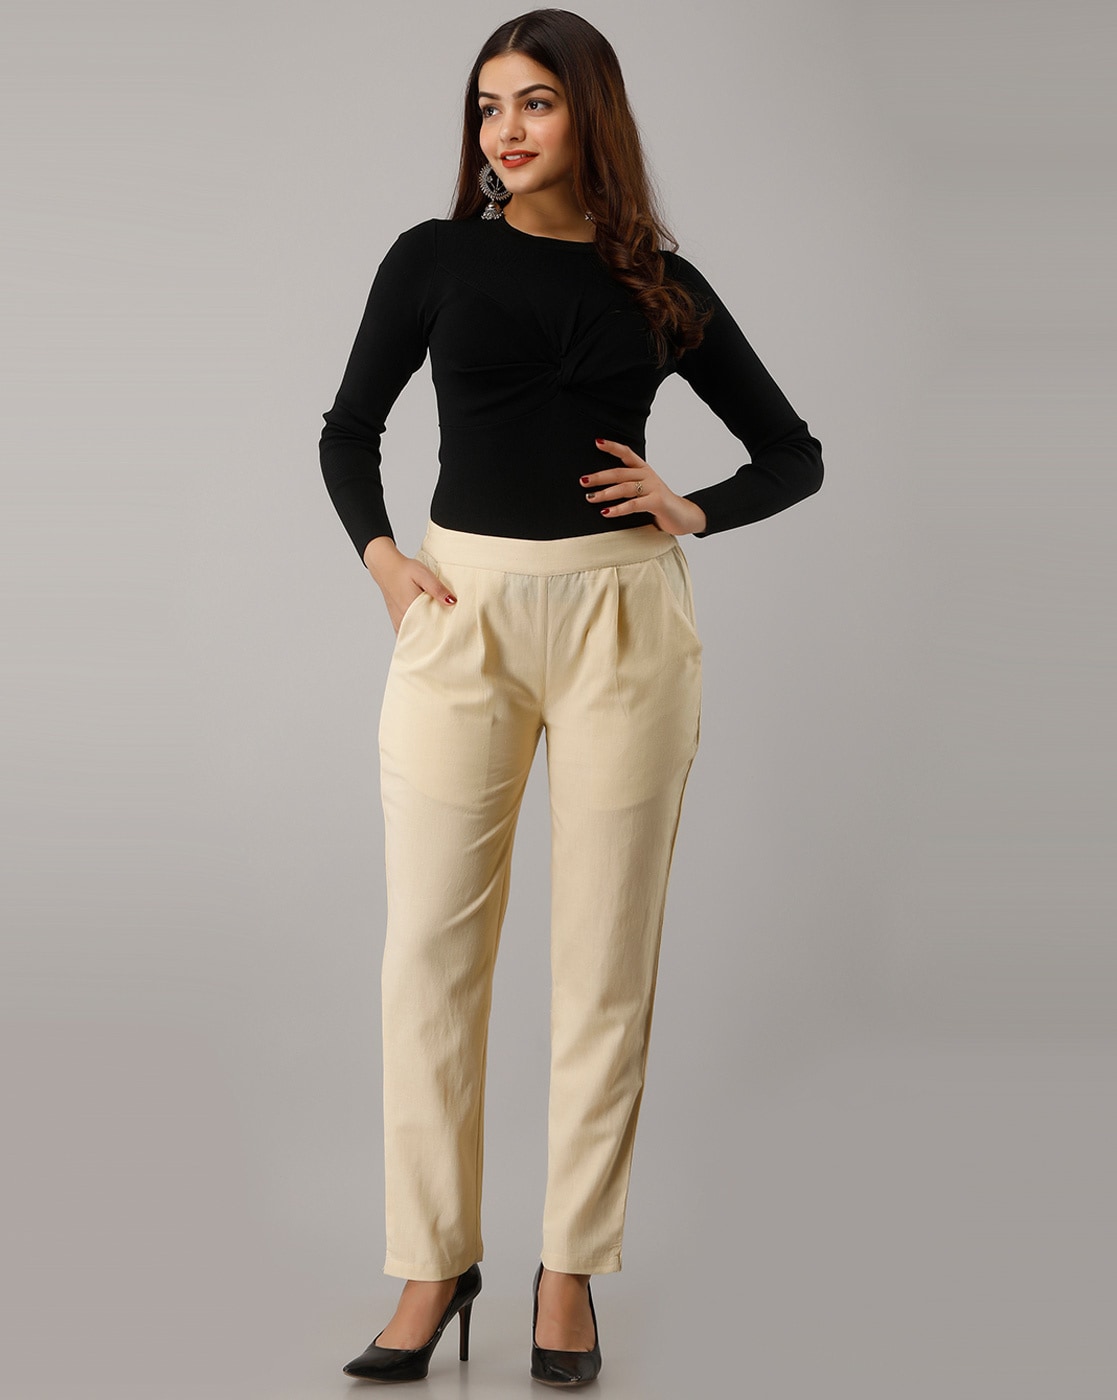 Women jacket and pants set Plus size wholesale Cream color | From Turkey